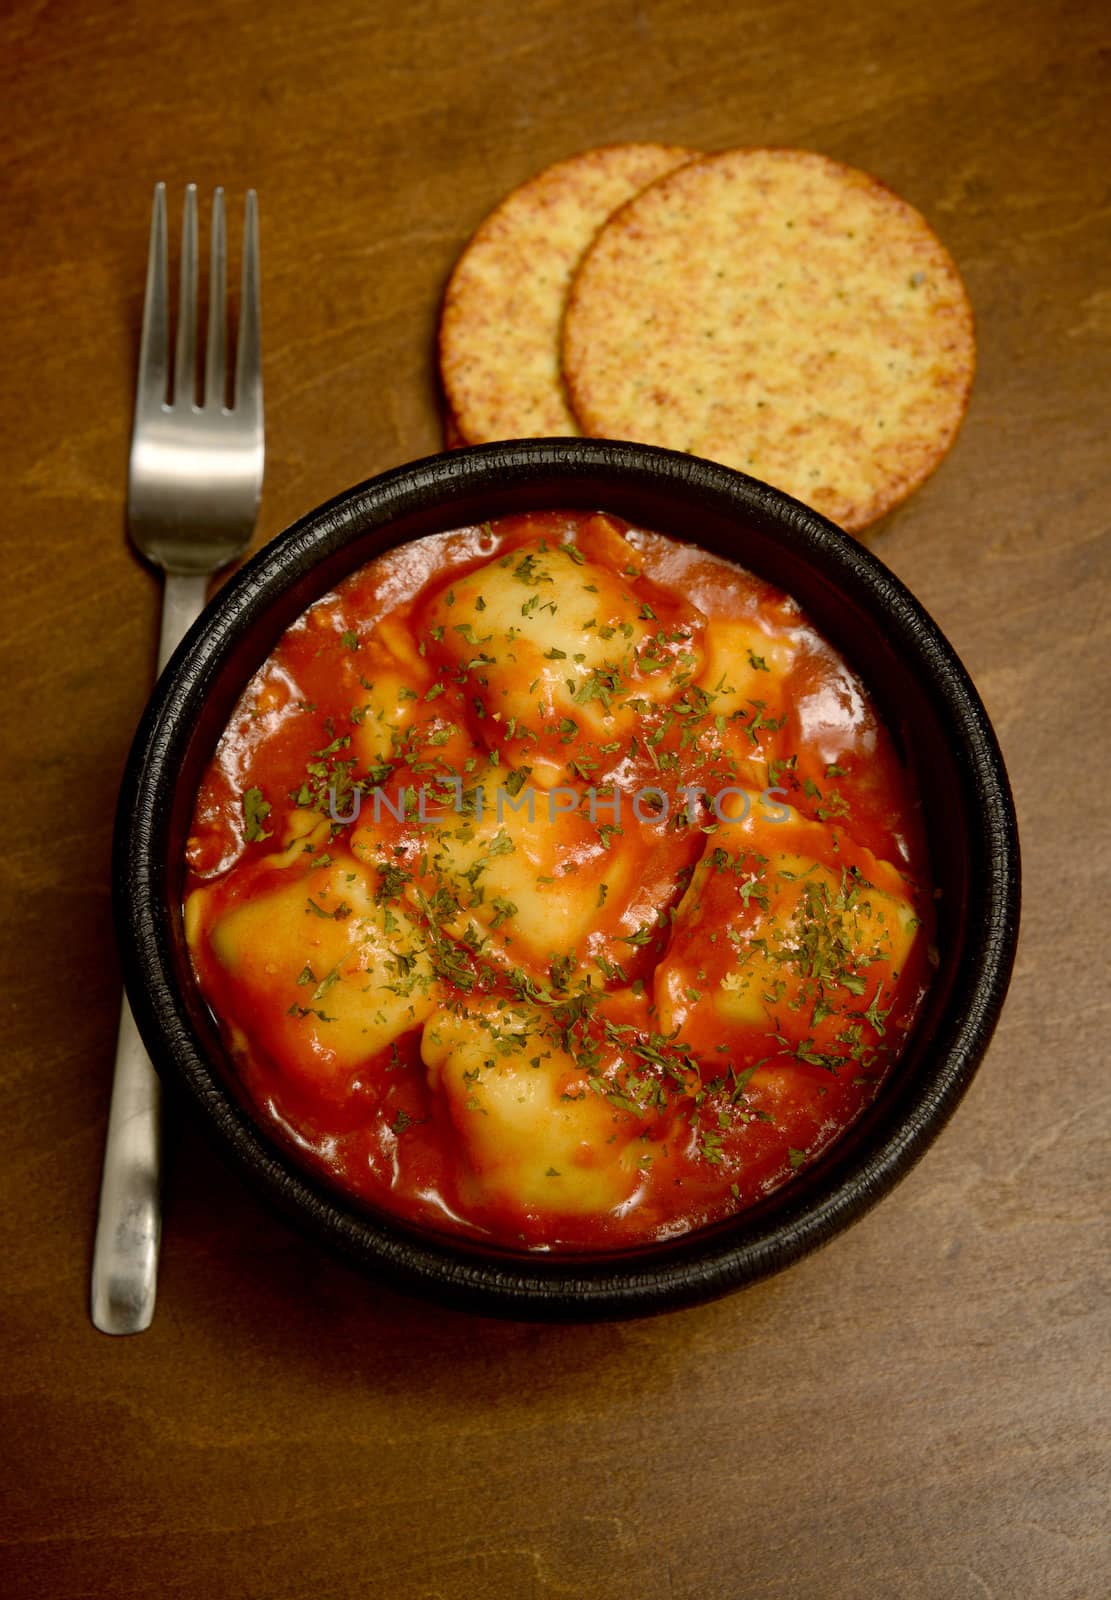 ravioli and red tomato sauce by ftlaudgirl